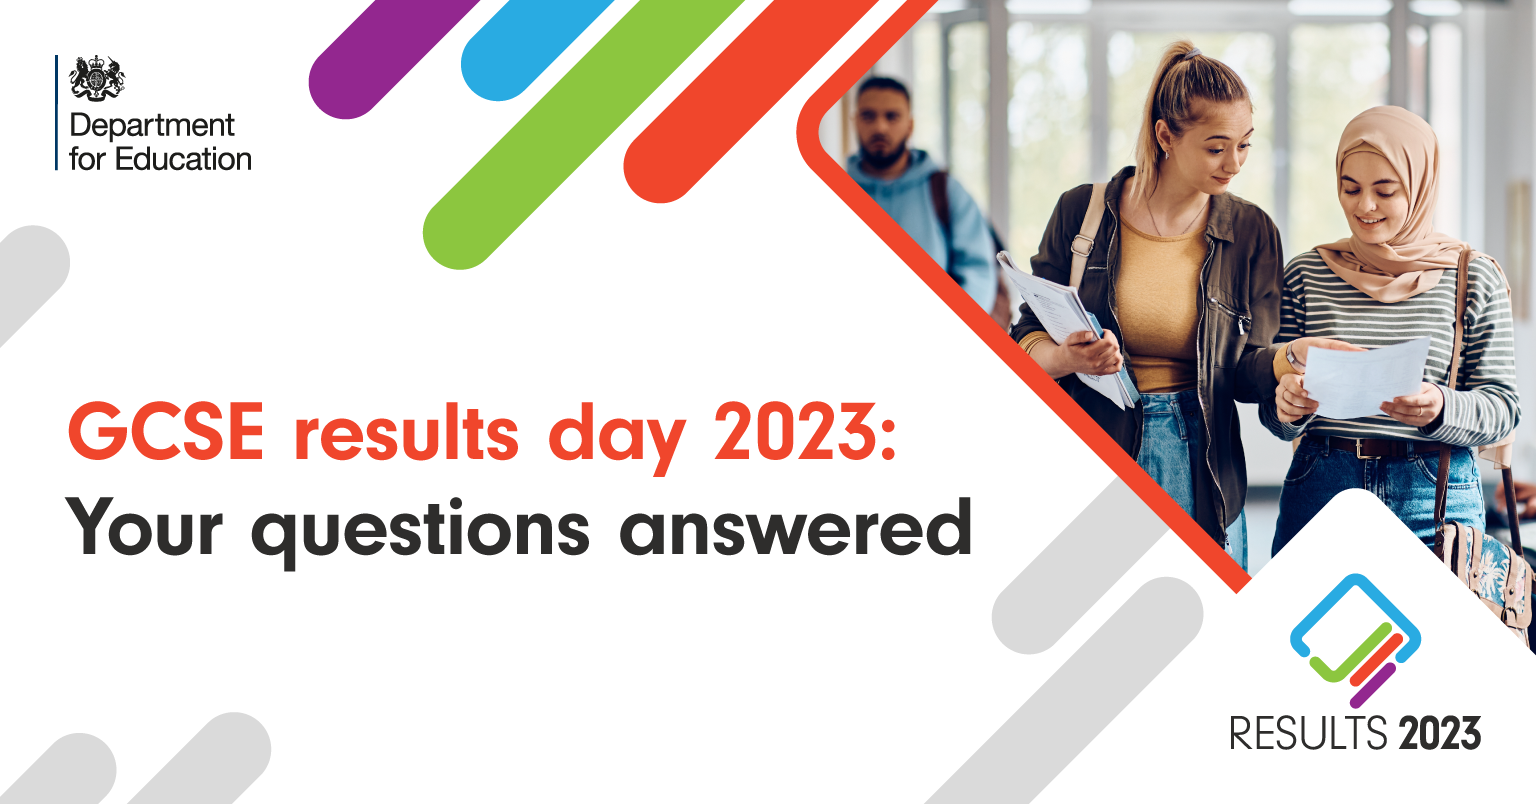 GCSE results day 2023: Your questions answered